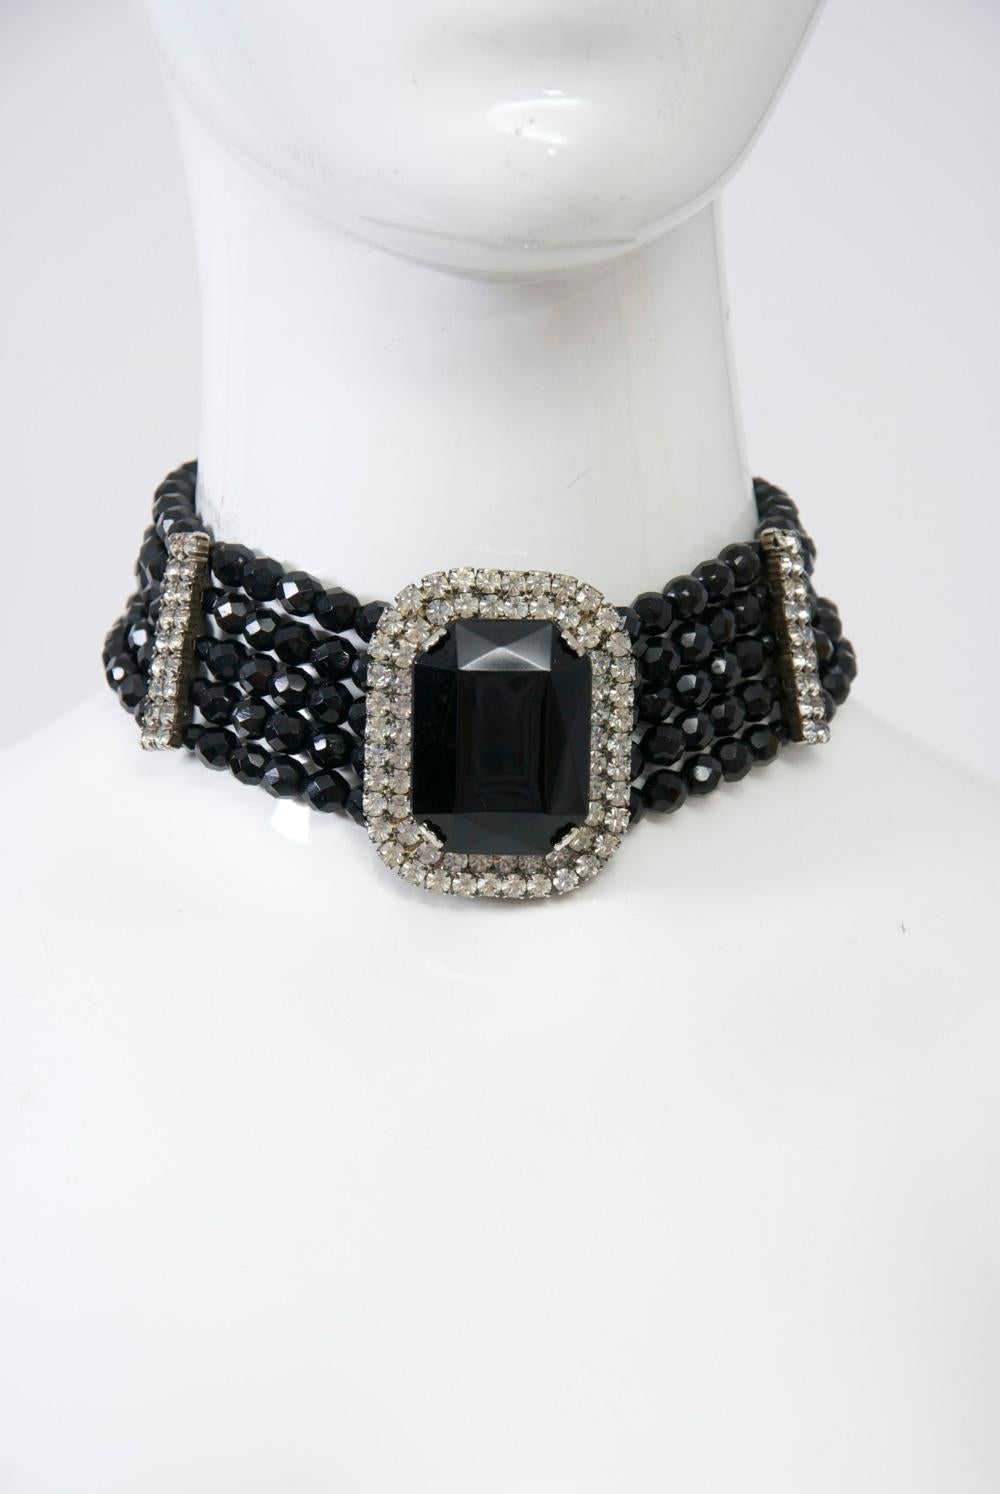 C.1970s wide choker composed of five strands of faceted black glass beads accented by vertical rhinestone bars at each side and centering a large rectangular black stone surrounded by rhinestones. Adjustable chain closure expands from 12”-15.5”;